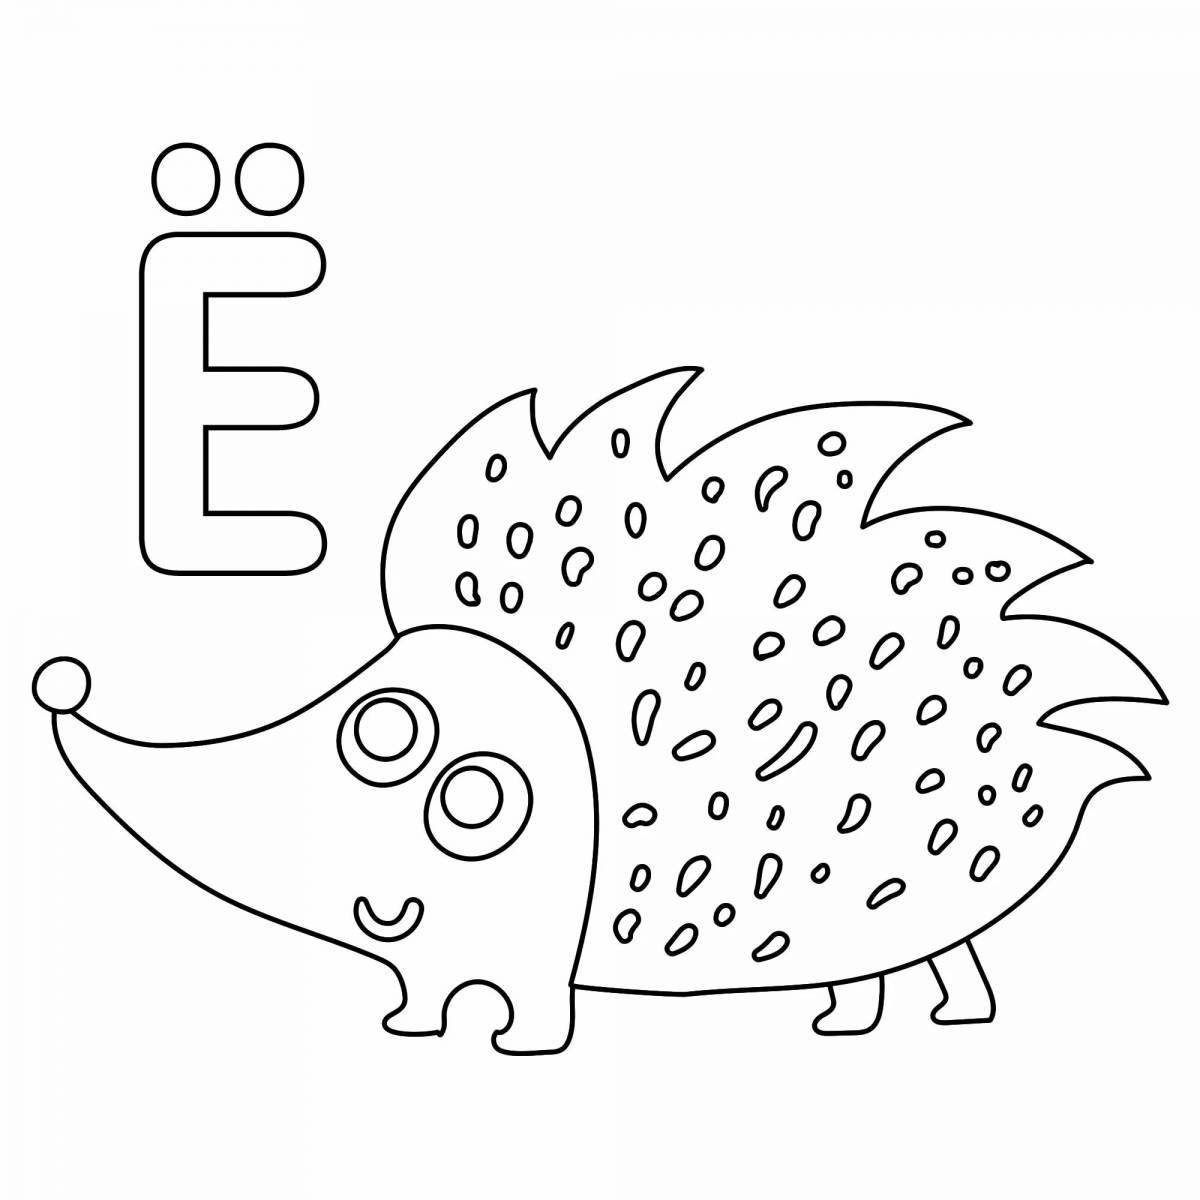 Adorable letter e coloring book for kids